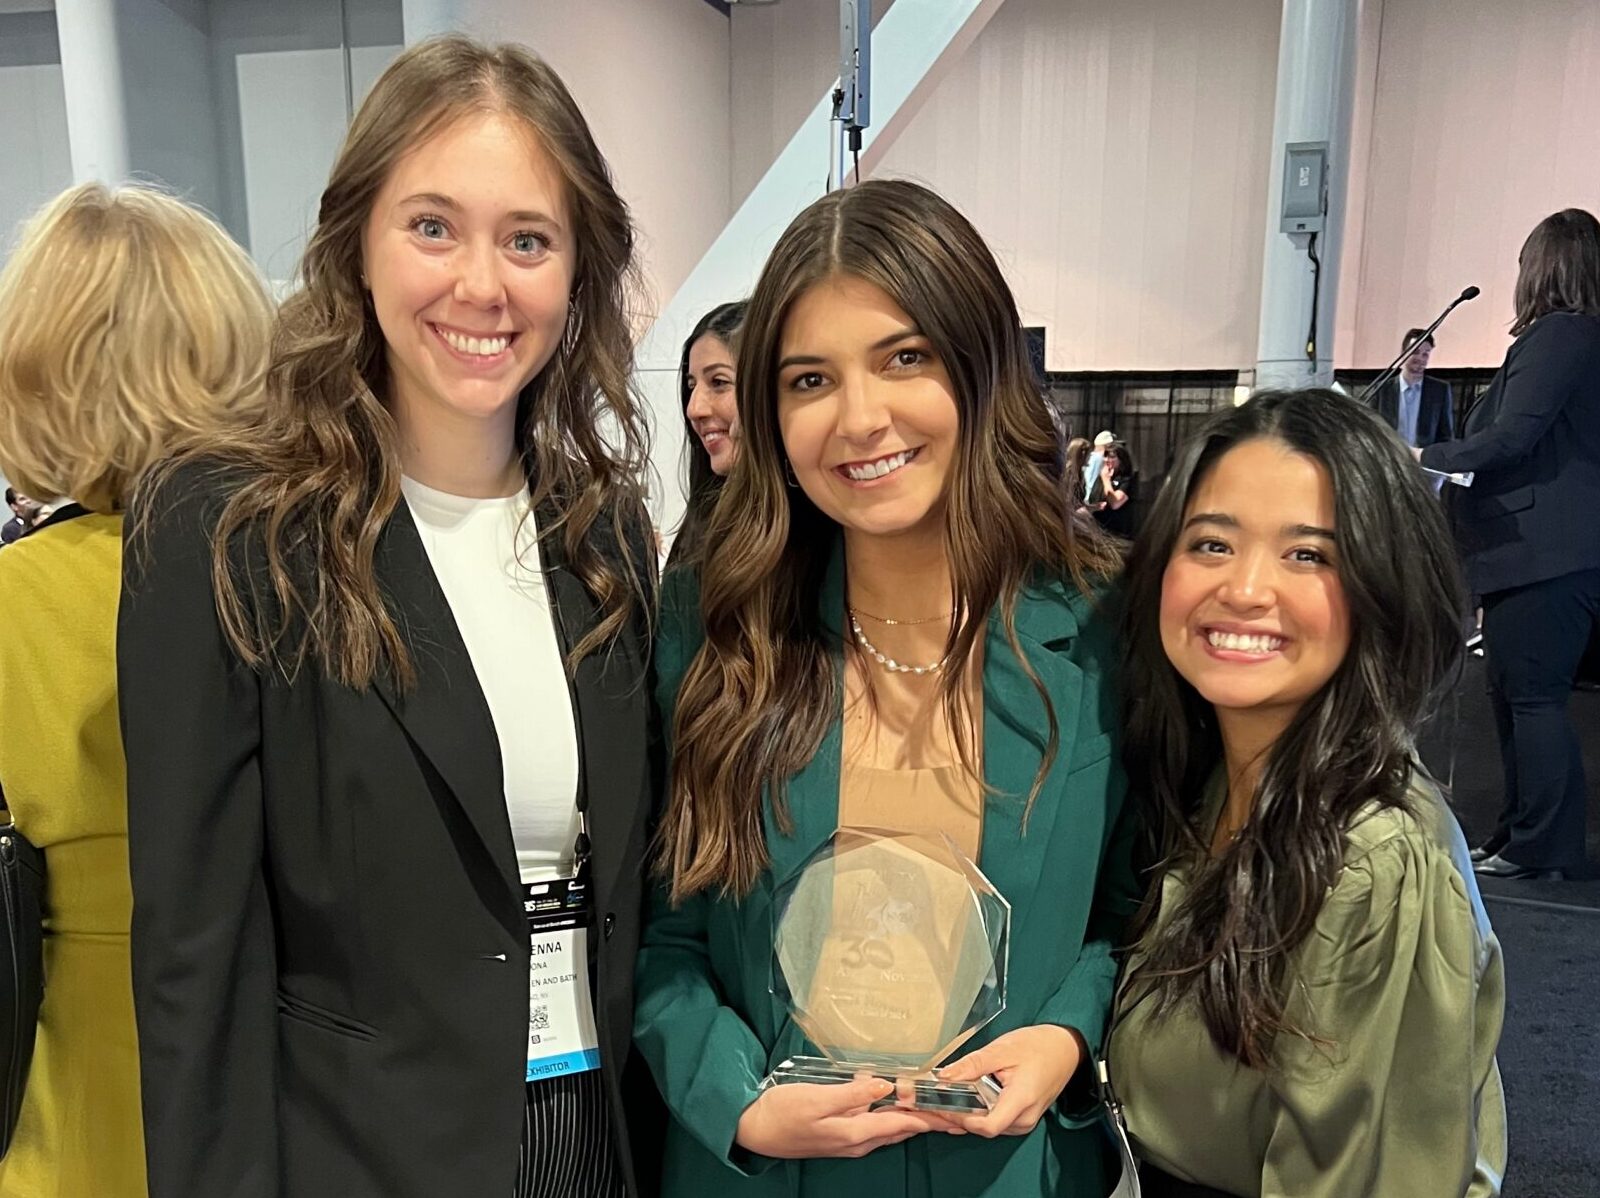 Featured image showing Alexis from ZLine posing with Colleagues at an awards ceremony while holding an award and smiling at the camera.